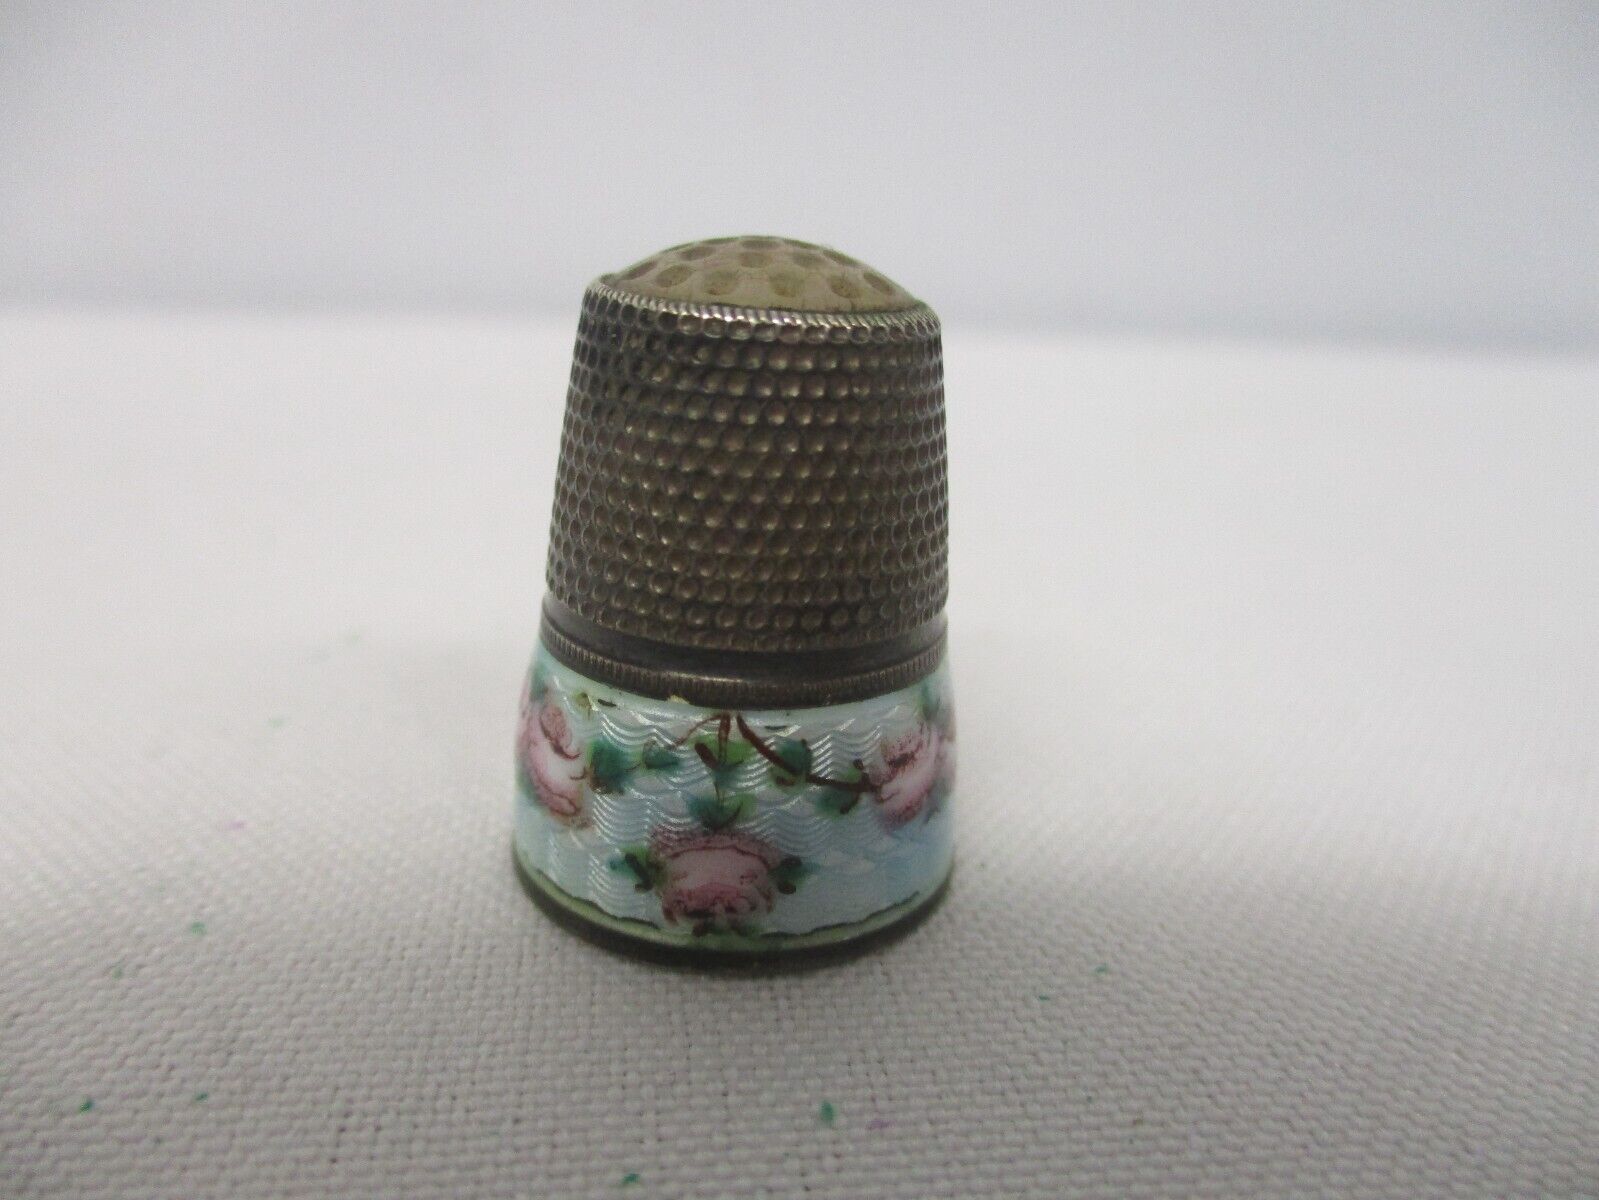 ANTIQUE 835 SILVER with BLUE GUILLOCHE ENAMEL & ROSES THIMBLE with GLASS ON TOP